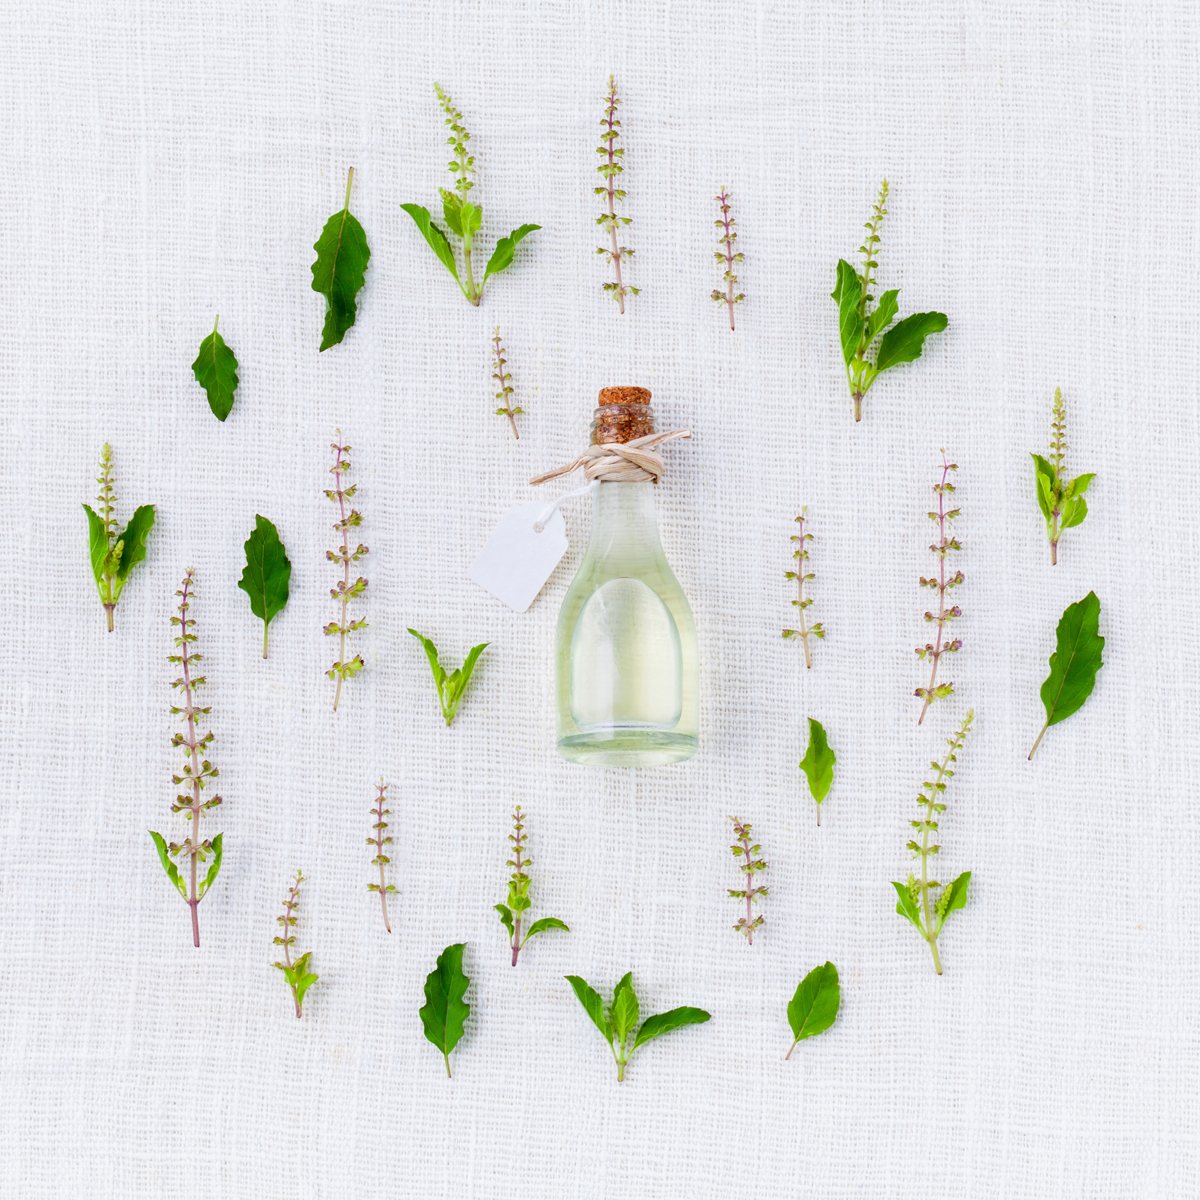 Aromatherapy - Make Your Own in Minutes For Pennies